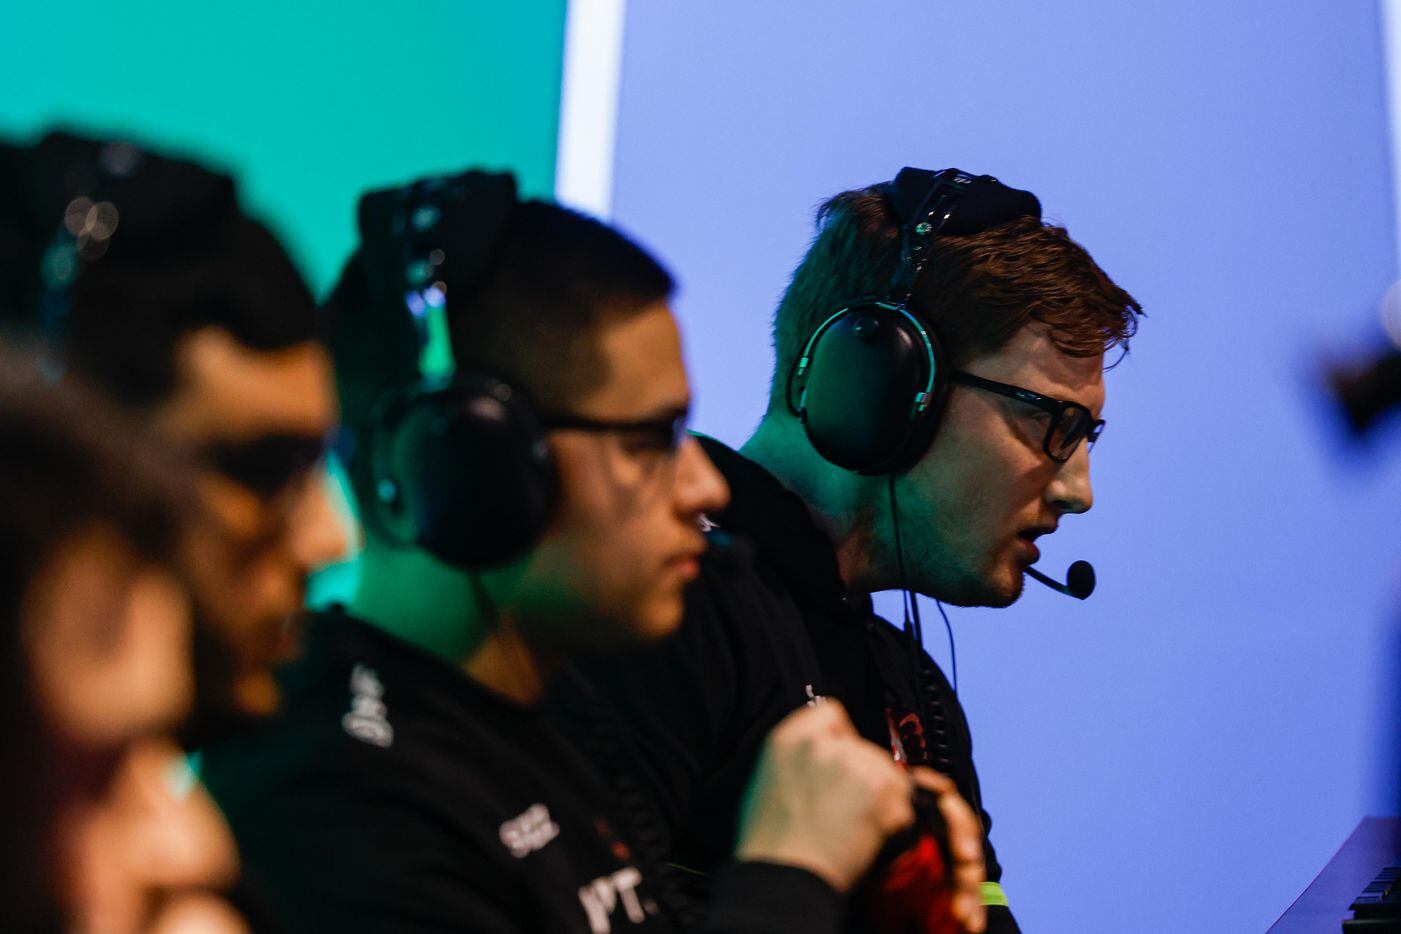 OpTic Texas' Seth "Scump" Abner (far right) along with the rest of the team during a match...